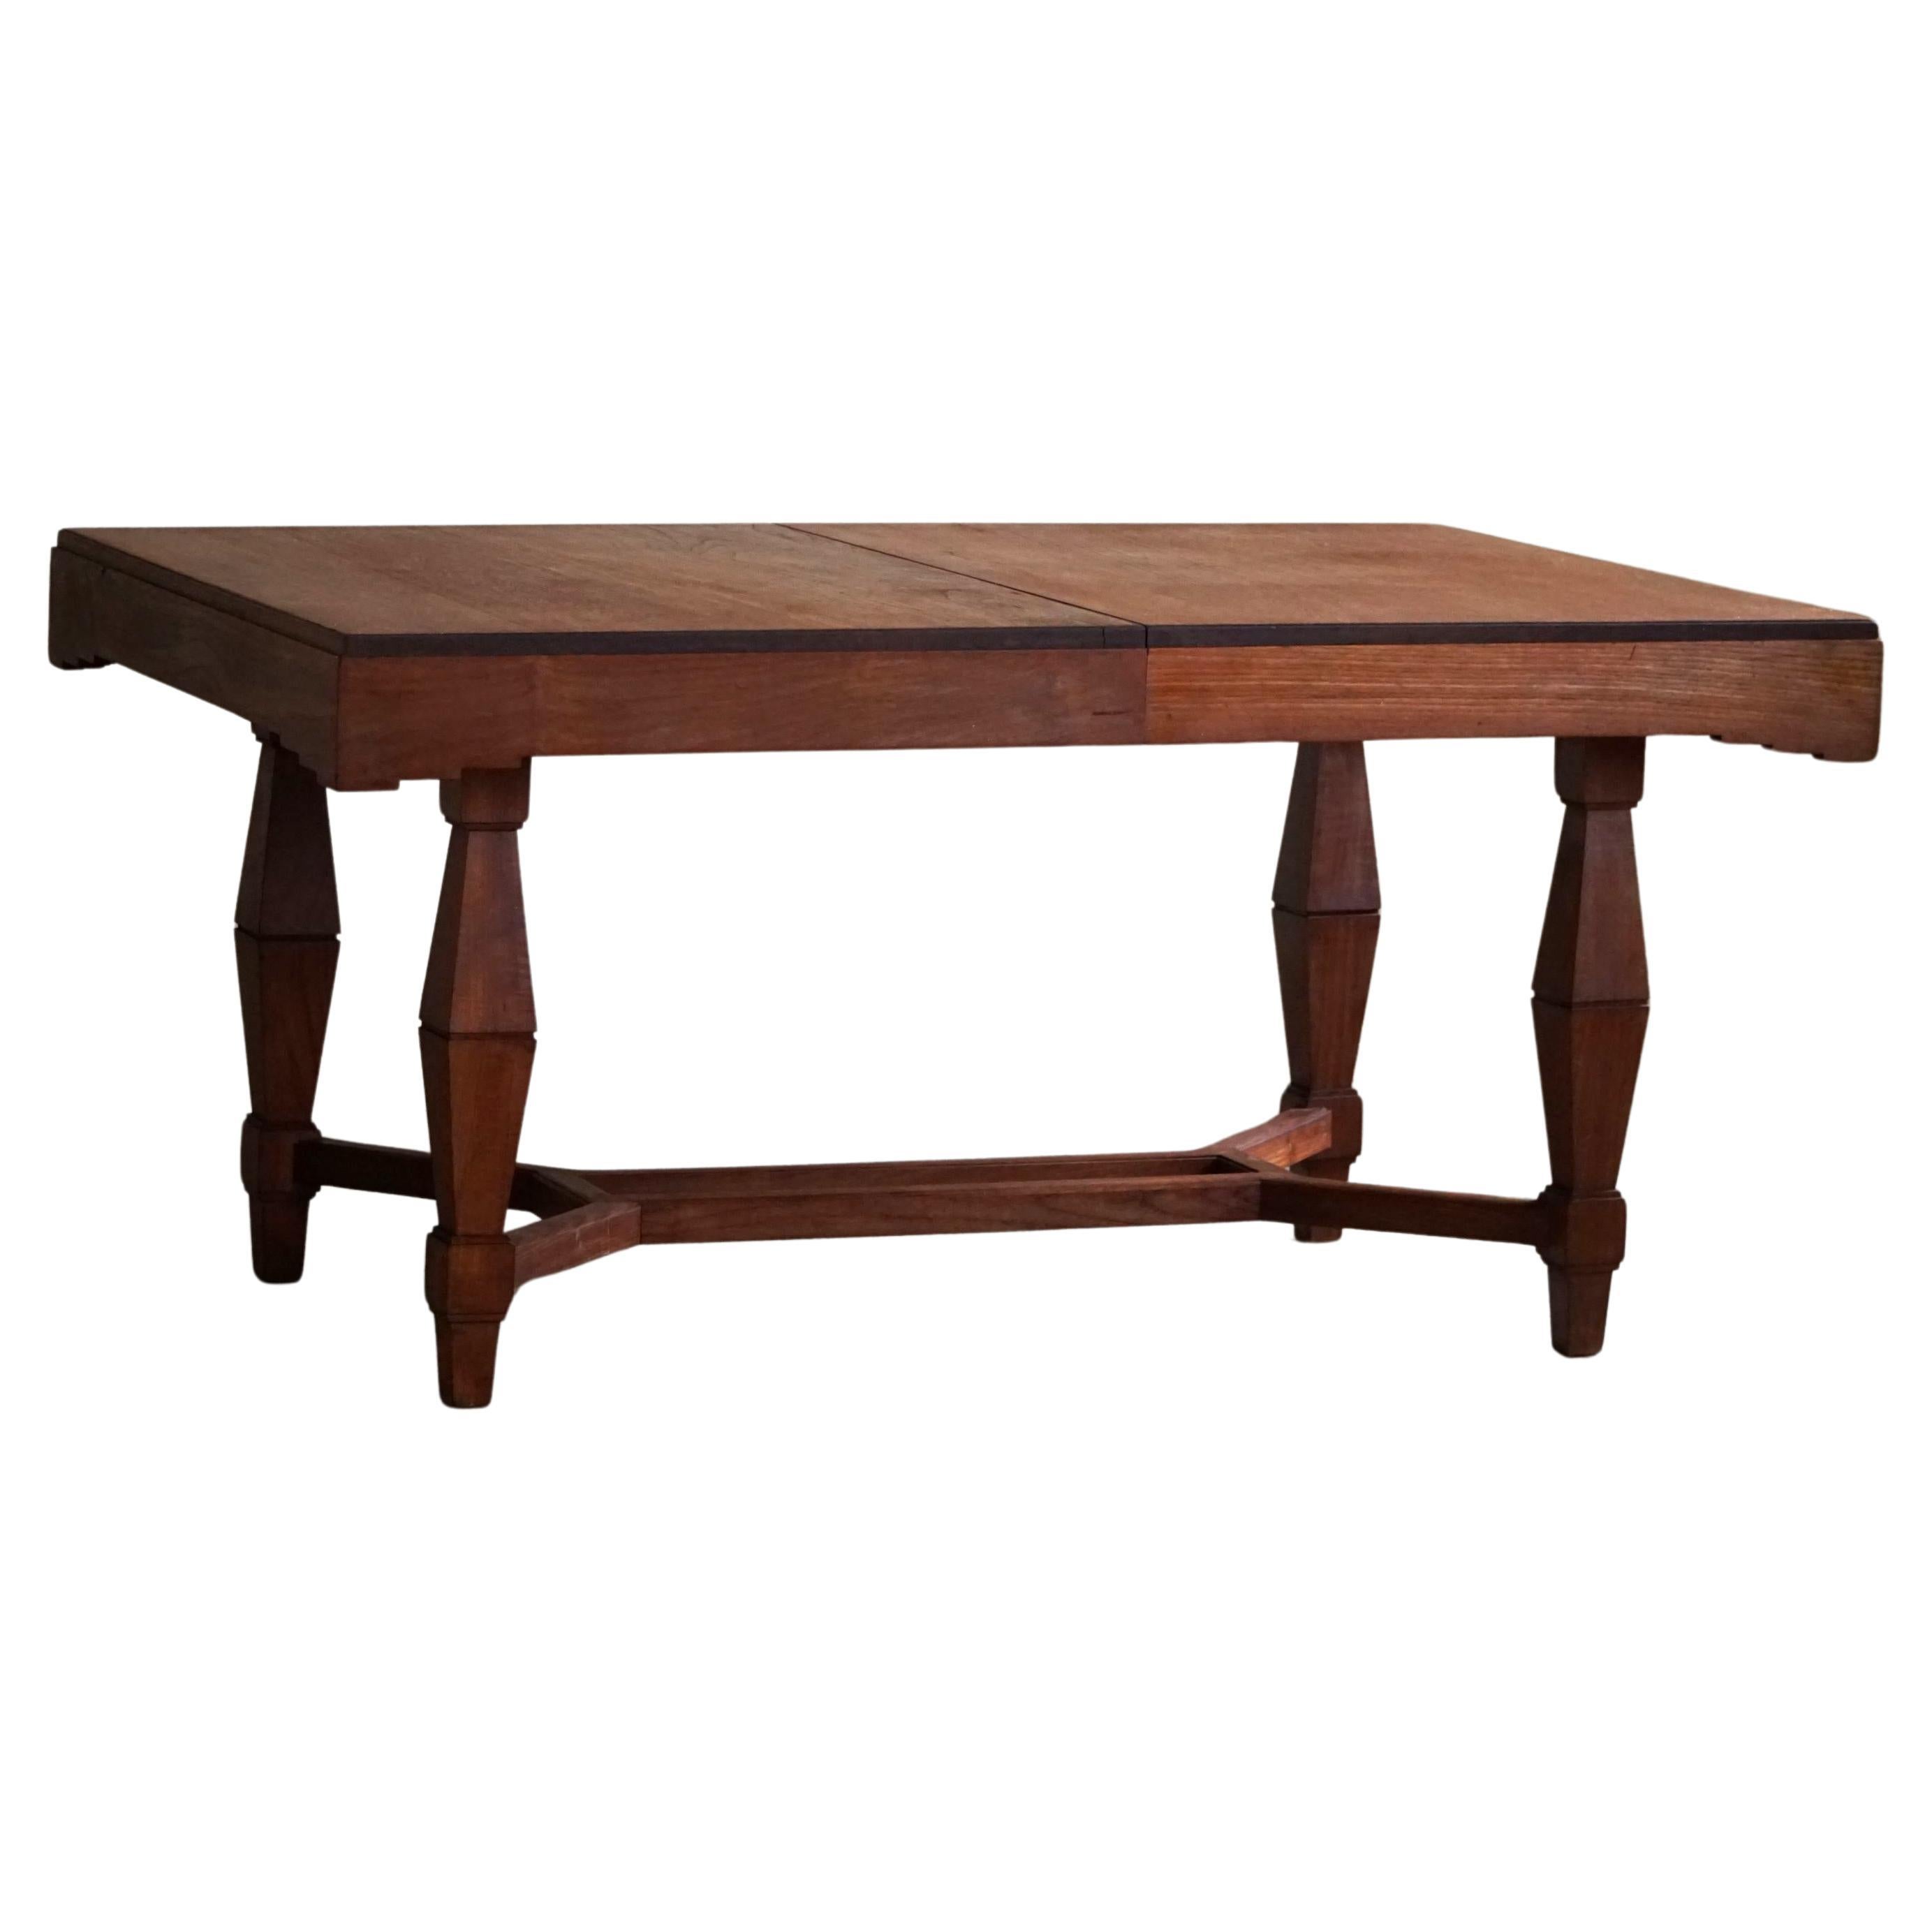 Art Deco Dining Table in Teak, with Butterfly Leaf, Danish Cabinetmaker, 1940s For Sale